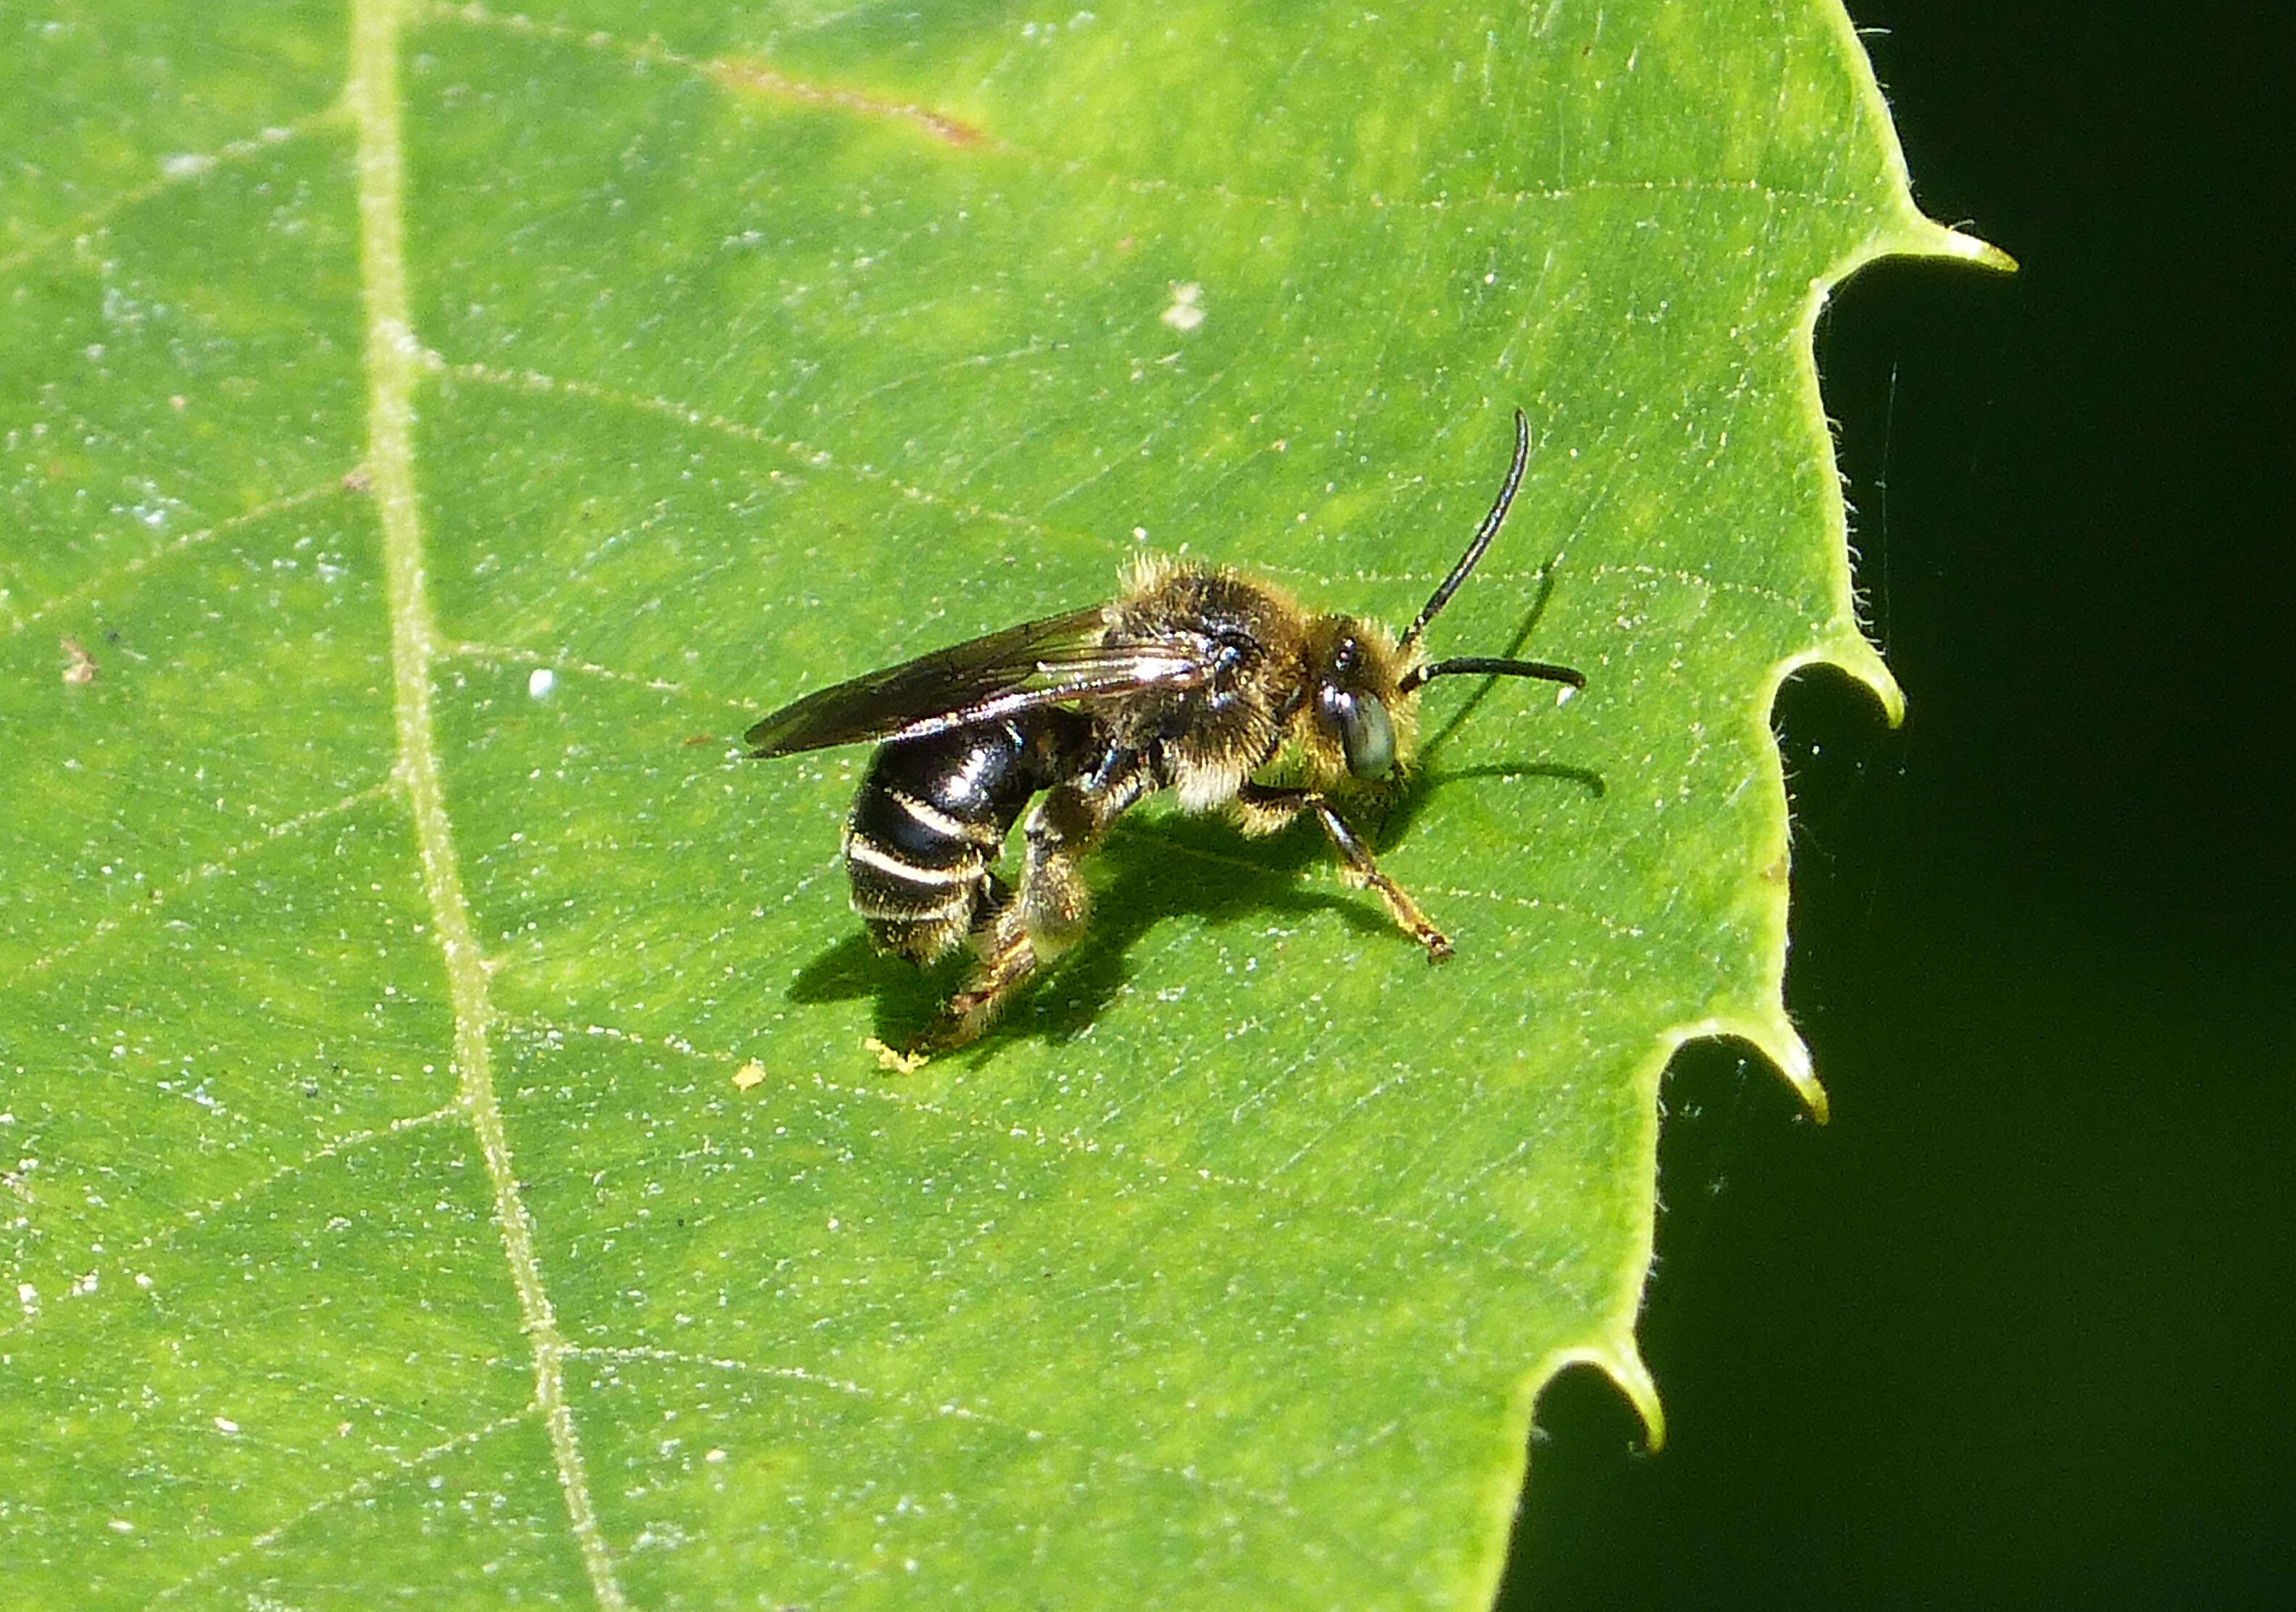 Image of bees & apoid Wasps